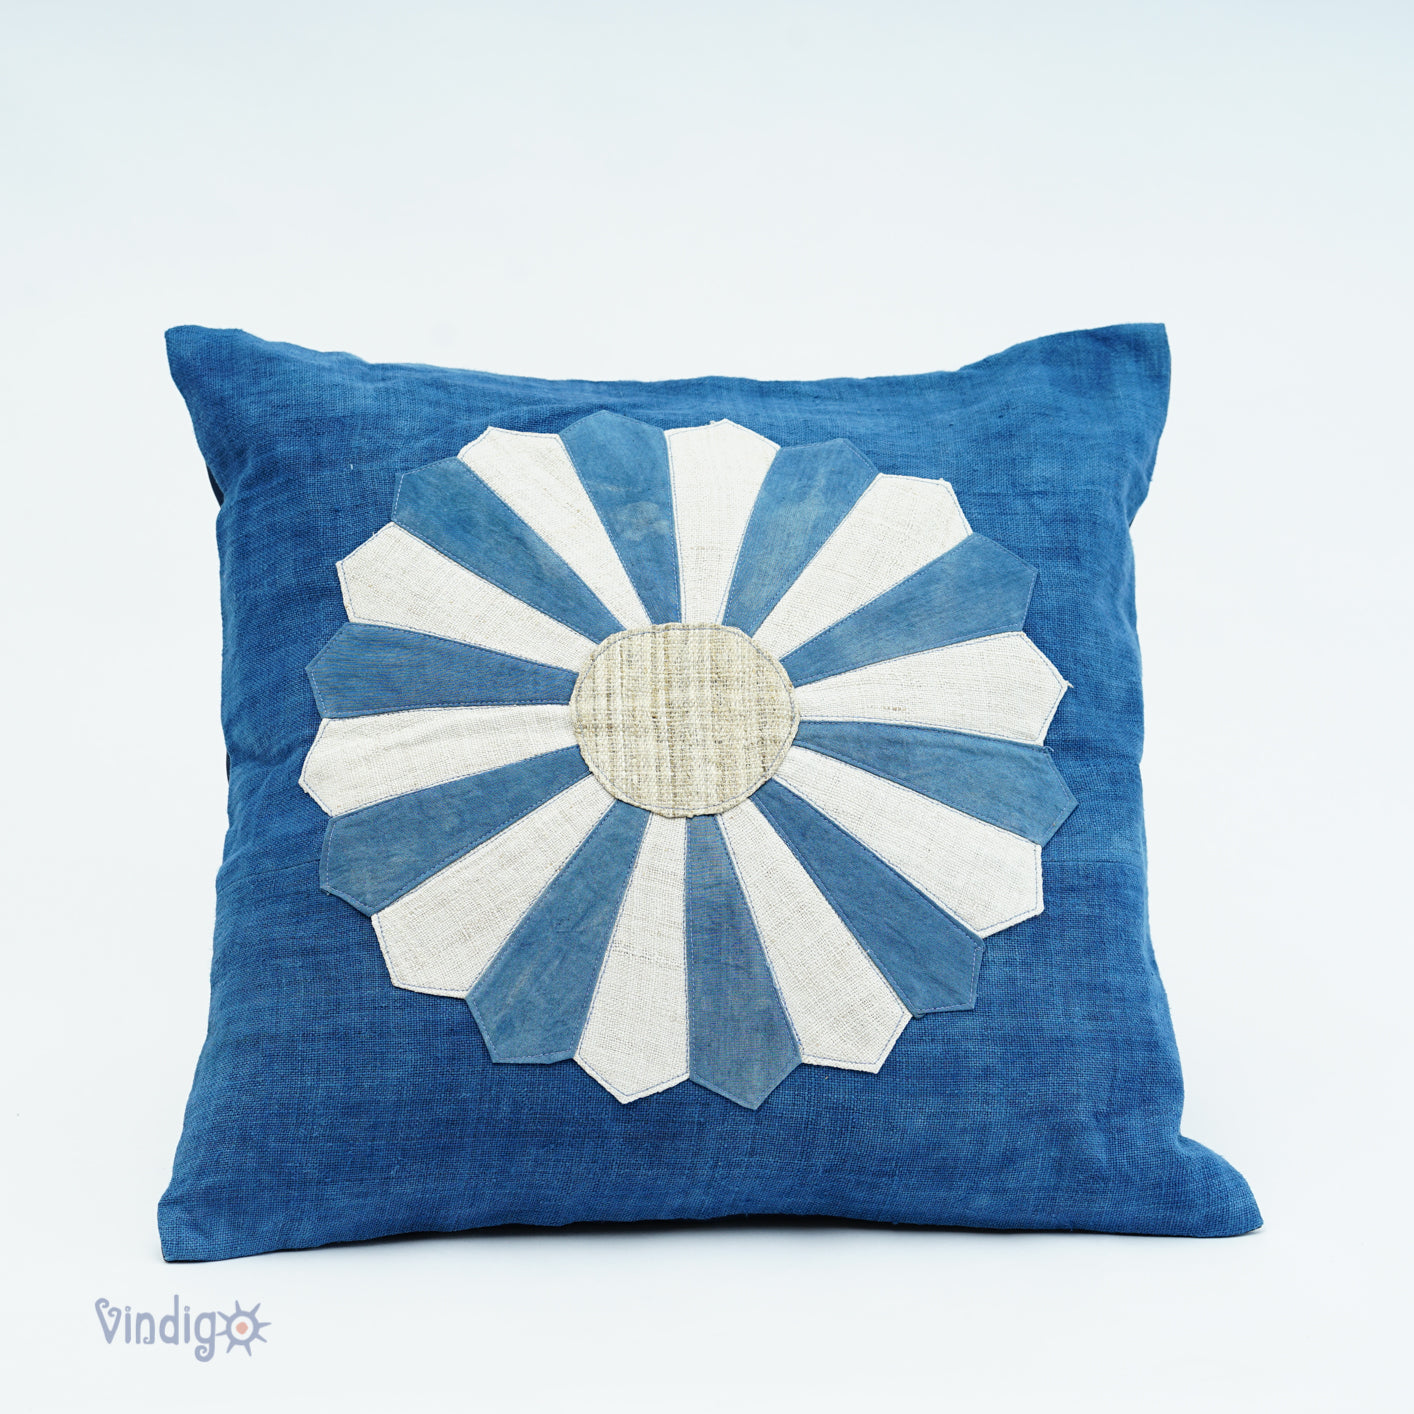 Quilt Cushion Cover, Dresden Plate Pattern in White and Indigo Blue, Hand-made hemp fabric